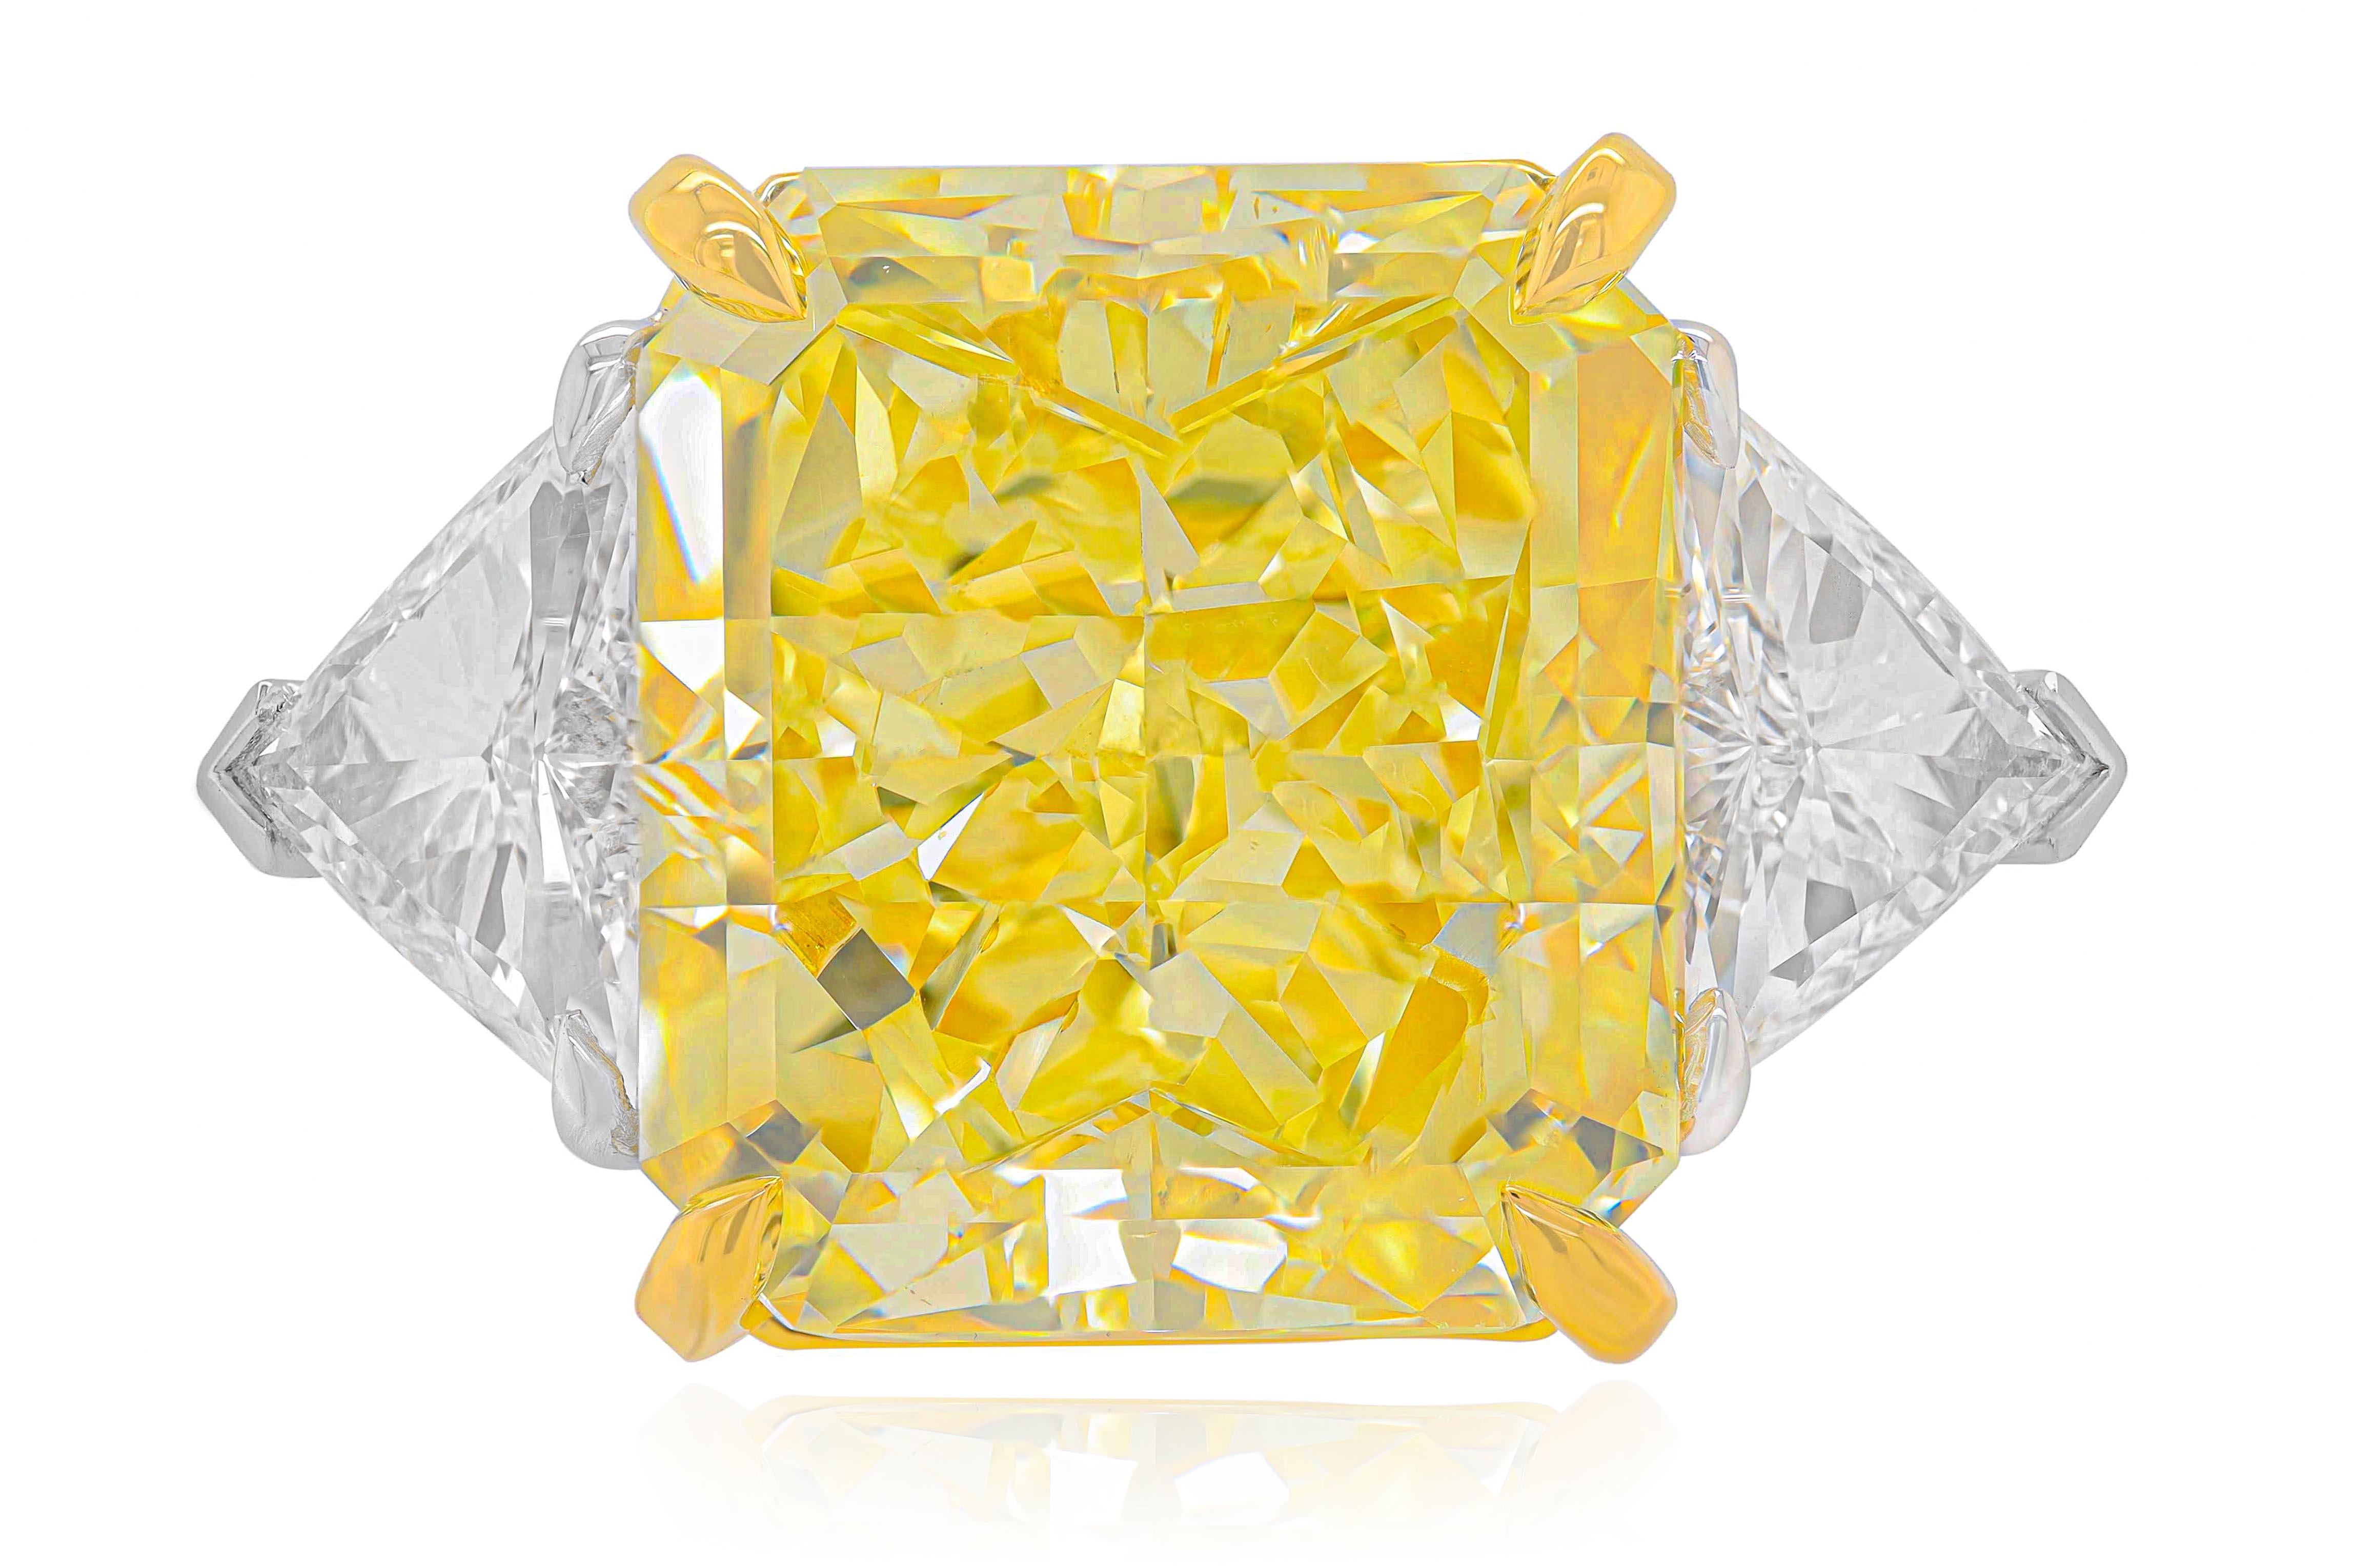 Magnificent platinum and 18kt yellow gold fancy yellow diamond engagement ring with center GIA certified 15.03 Carats Fancy Intense Yellow VS2 Radiant cut diamond set with two triangular, features 1.89 Carats  